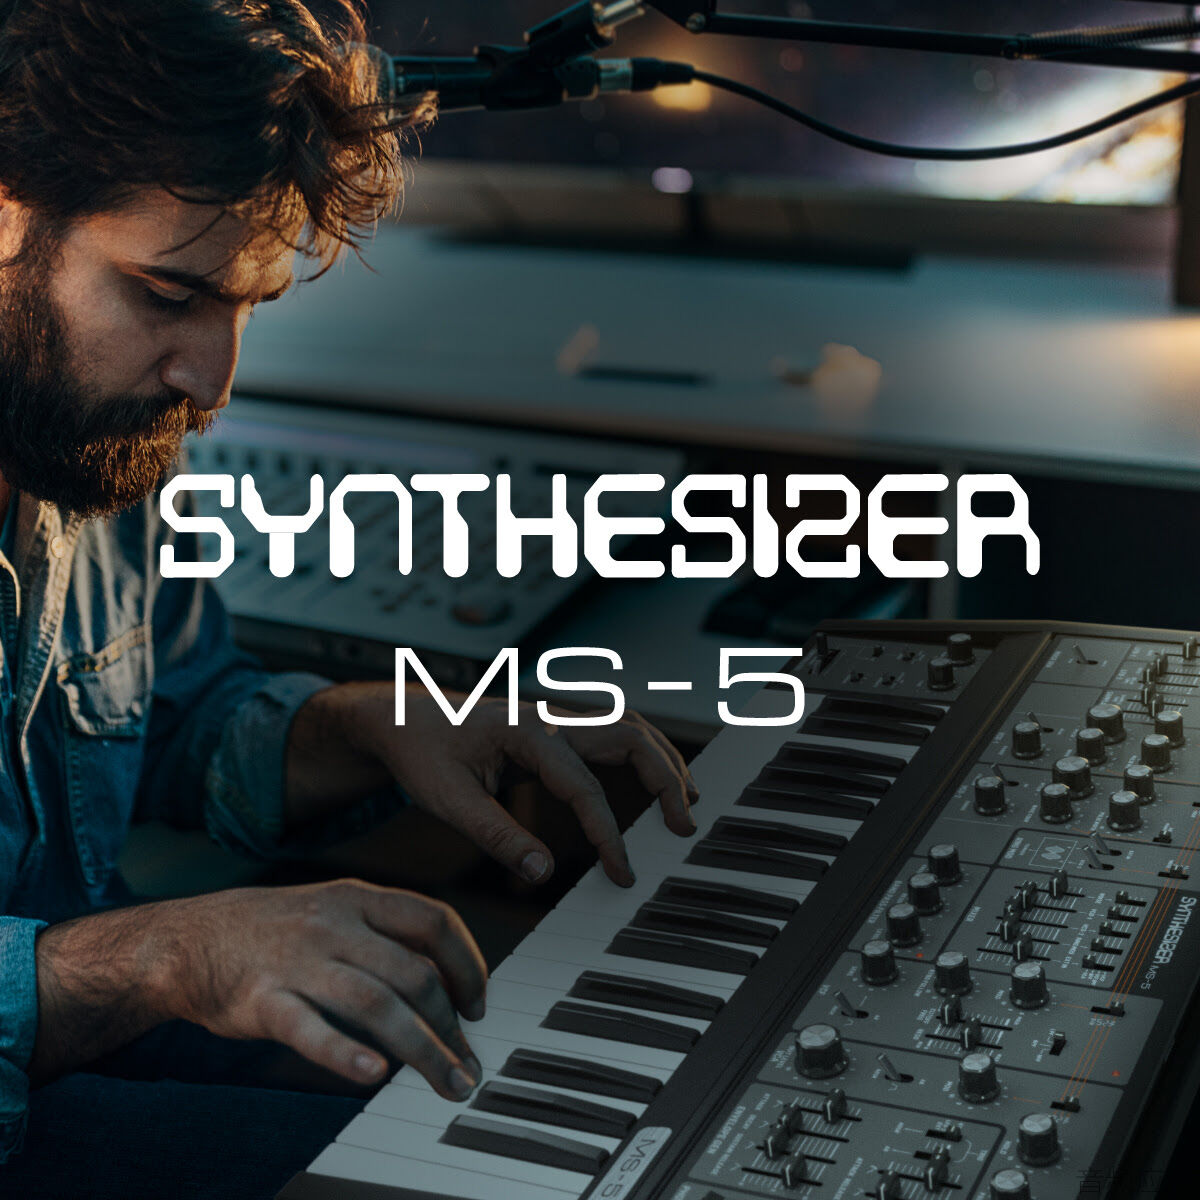 1110094d1712153755-behringer-announces-ms-5-analogue-synthesizer-unnamed.jpg